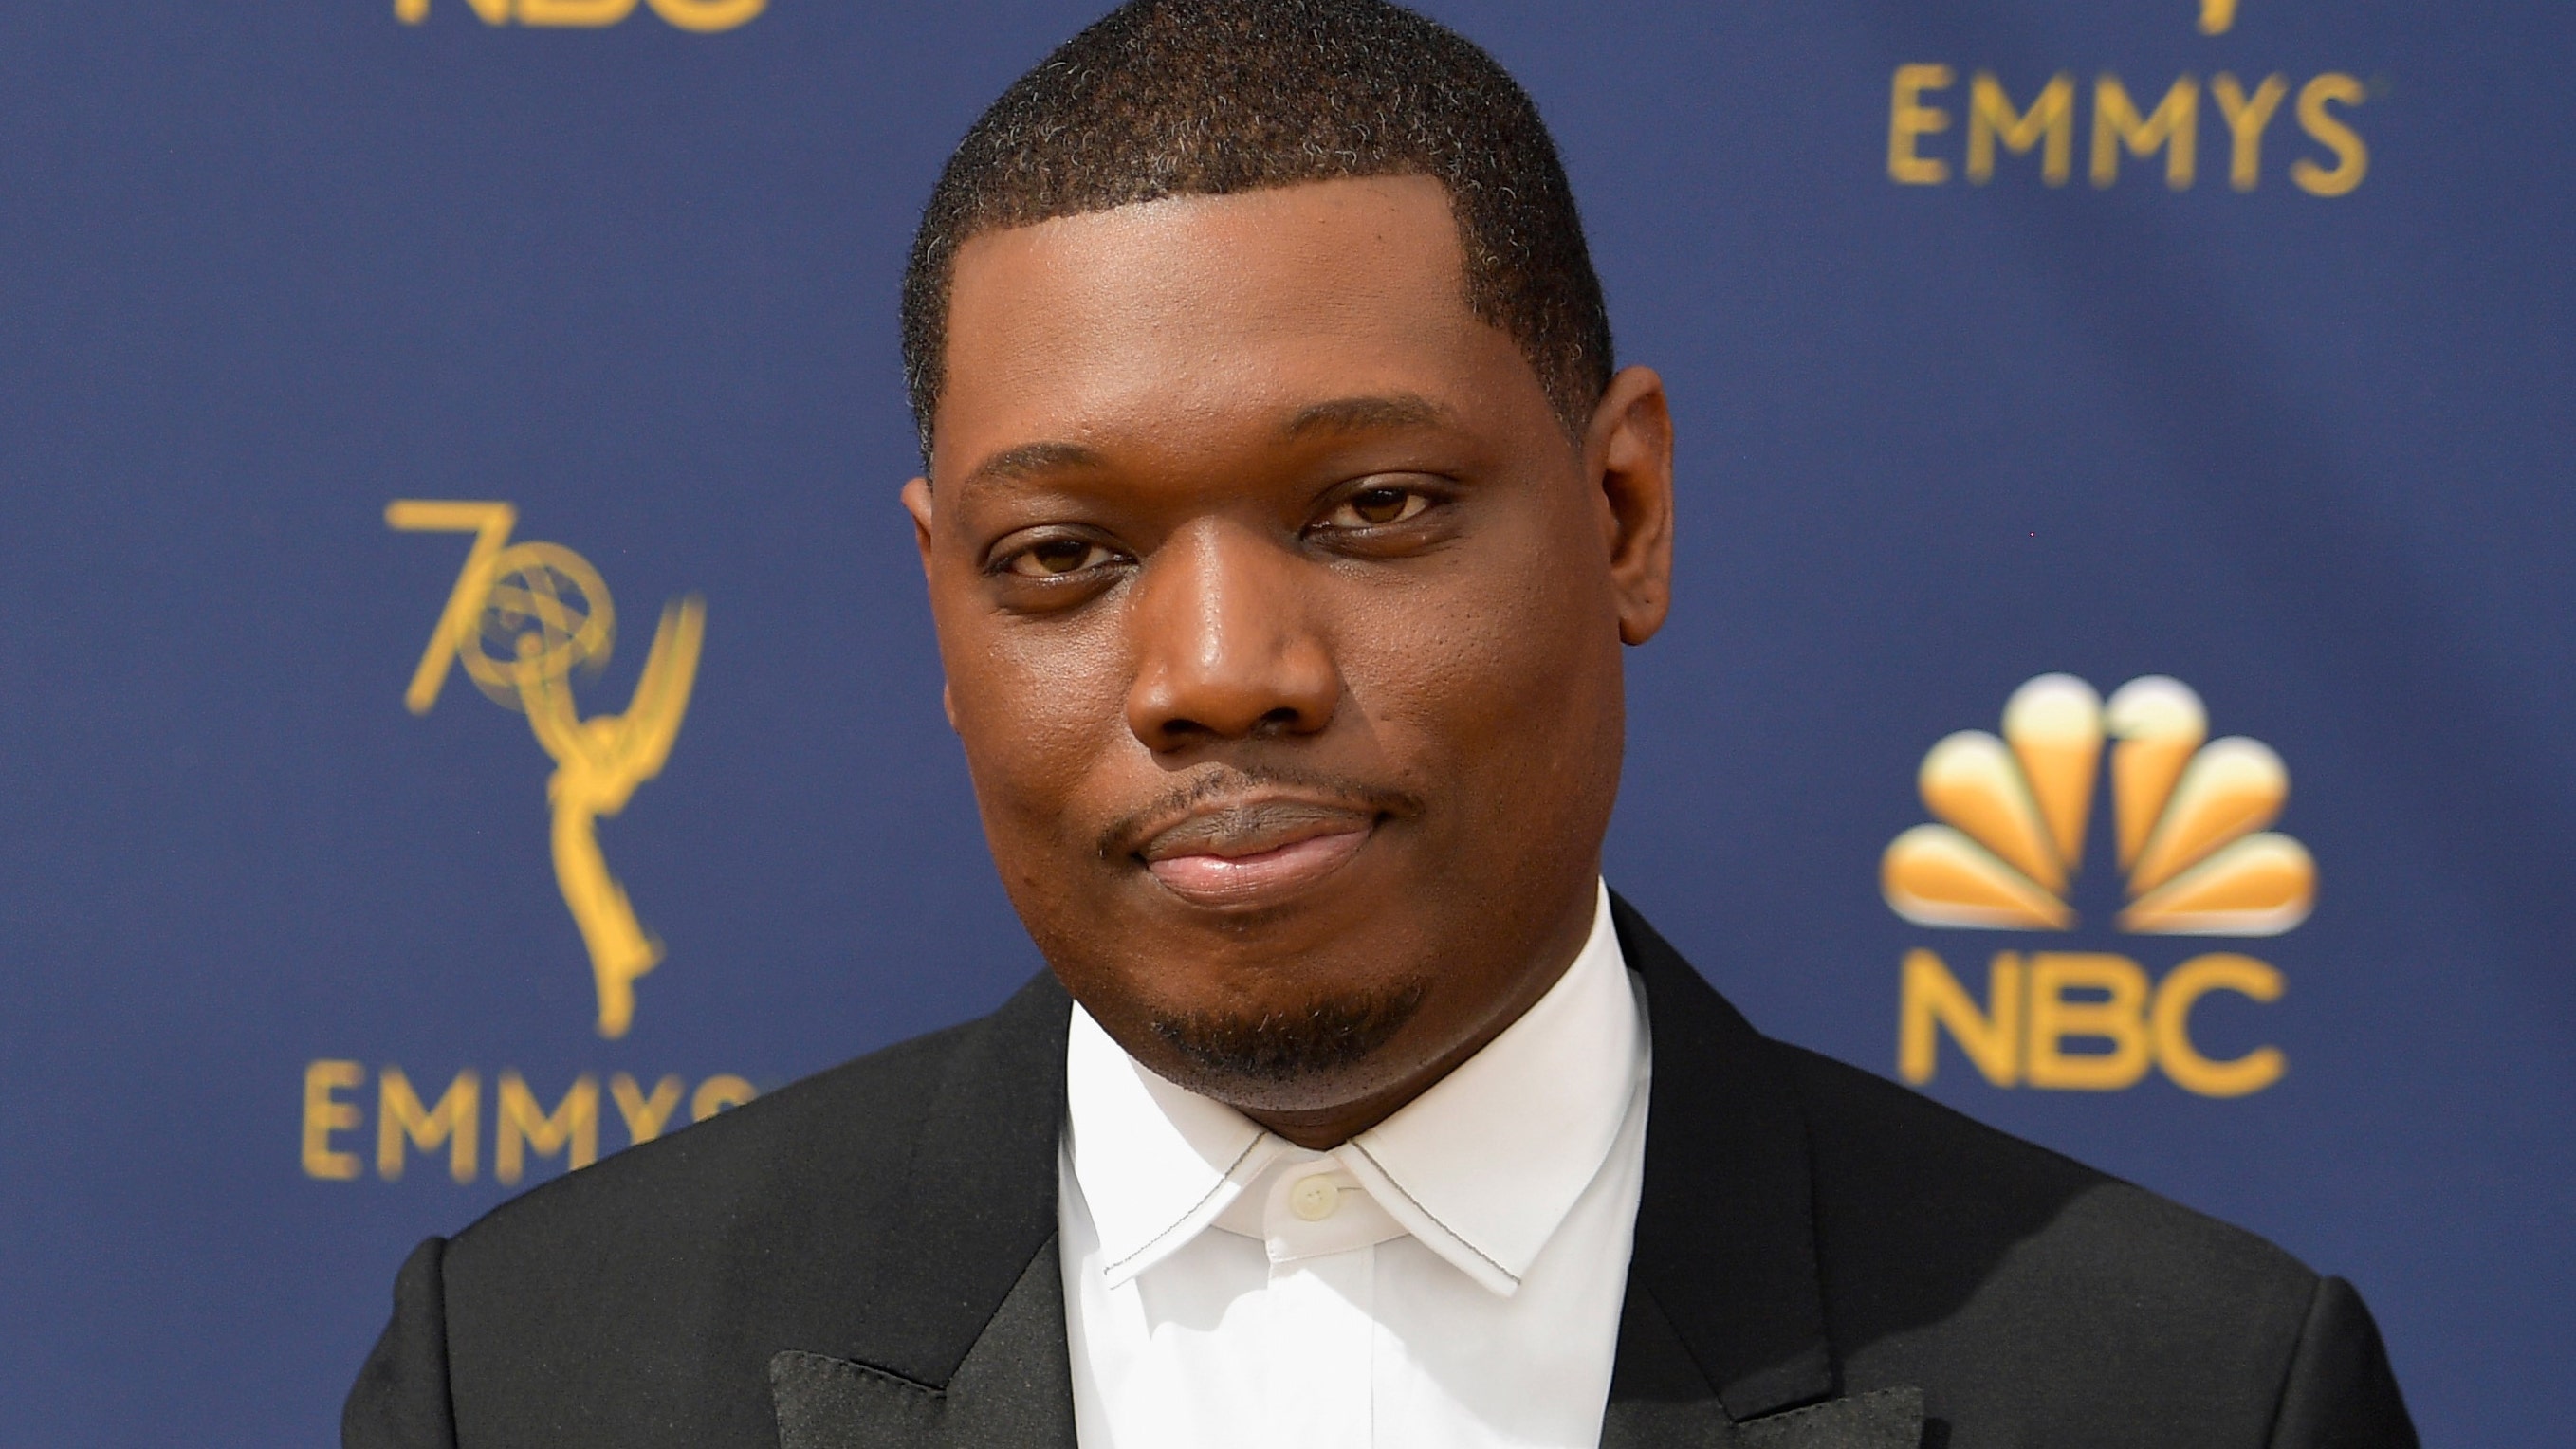 Michael Che of ‘SNL’, NBC accused of ‘anti-Semitic trope’ in the ‘Weekend update’ segment: ‘Withdraw and apologize’